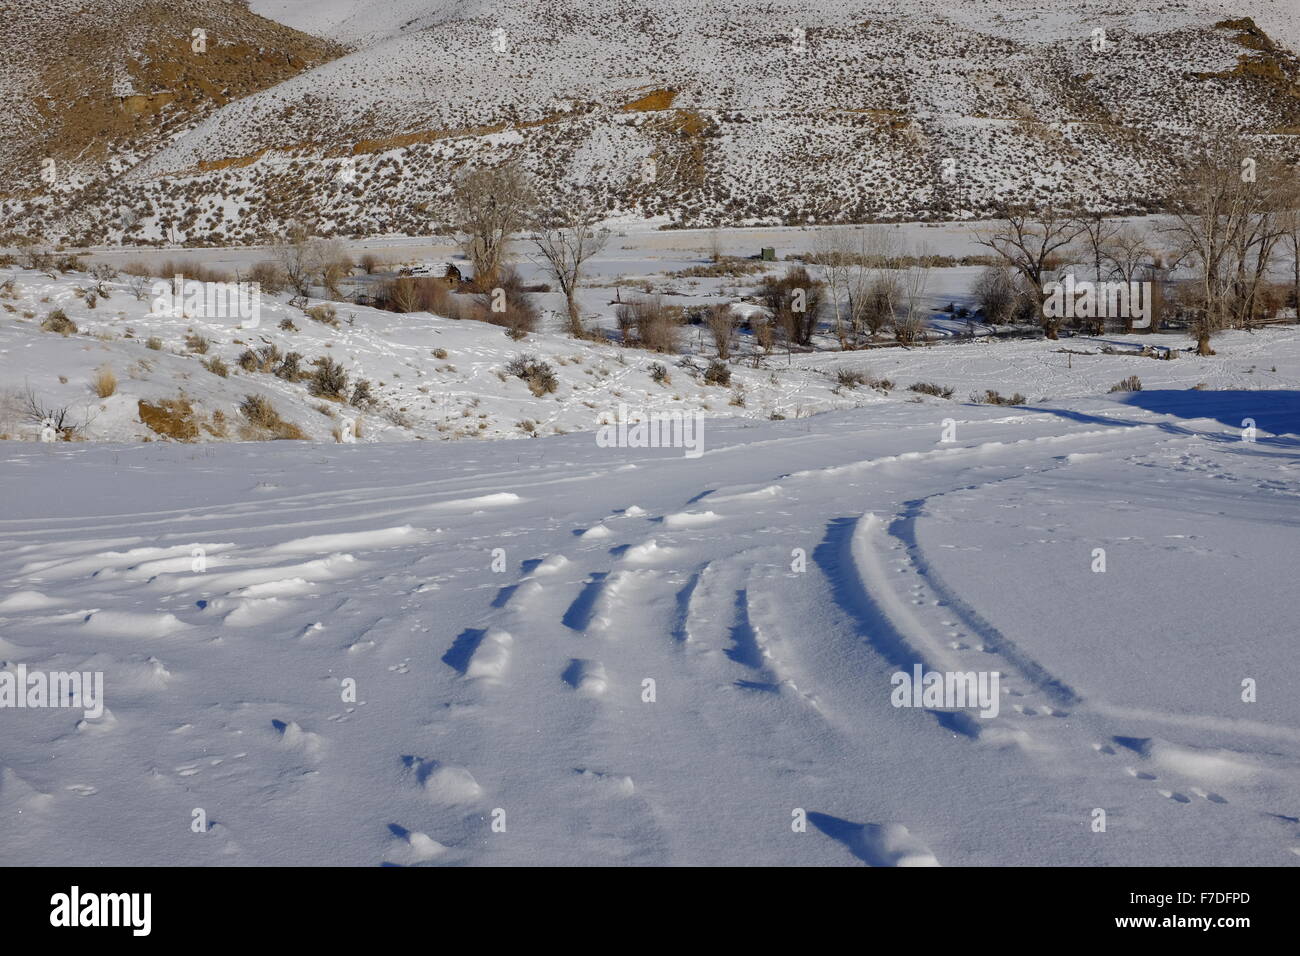 Winter snow scenes with animal tracks and frost in the trees; snow on a rural road Stock Photo